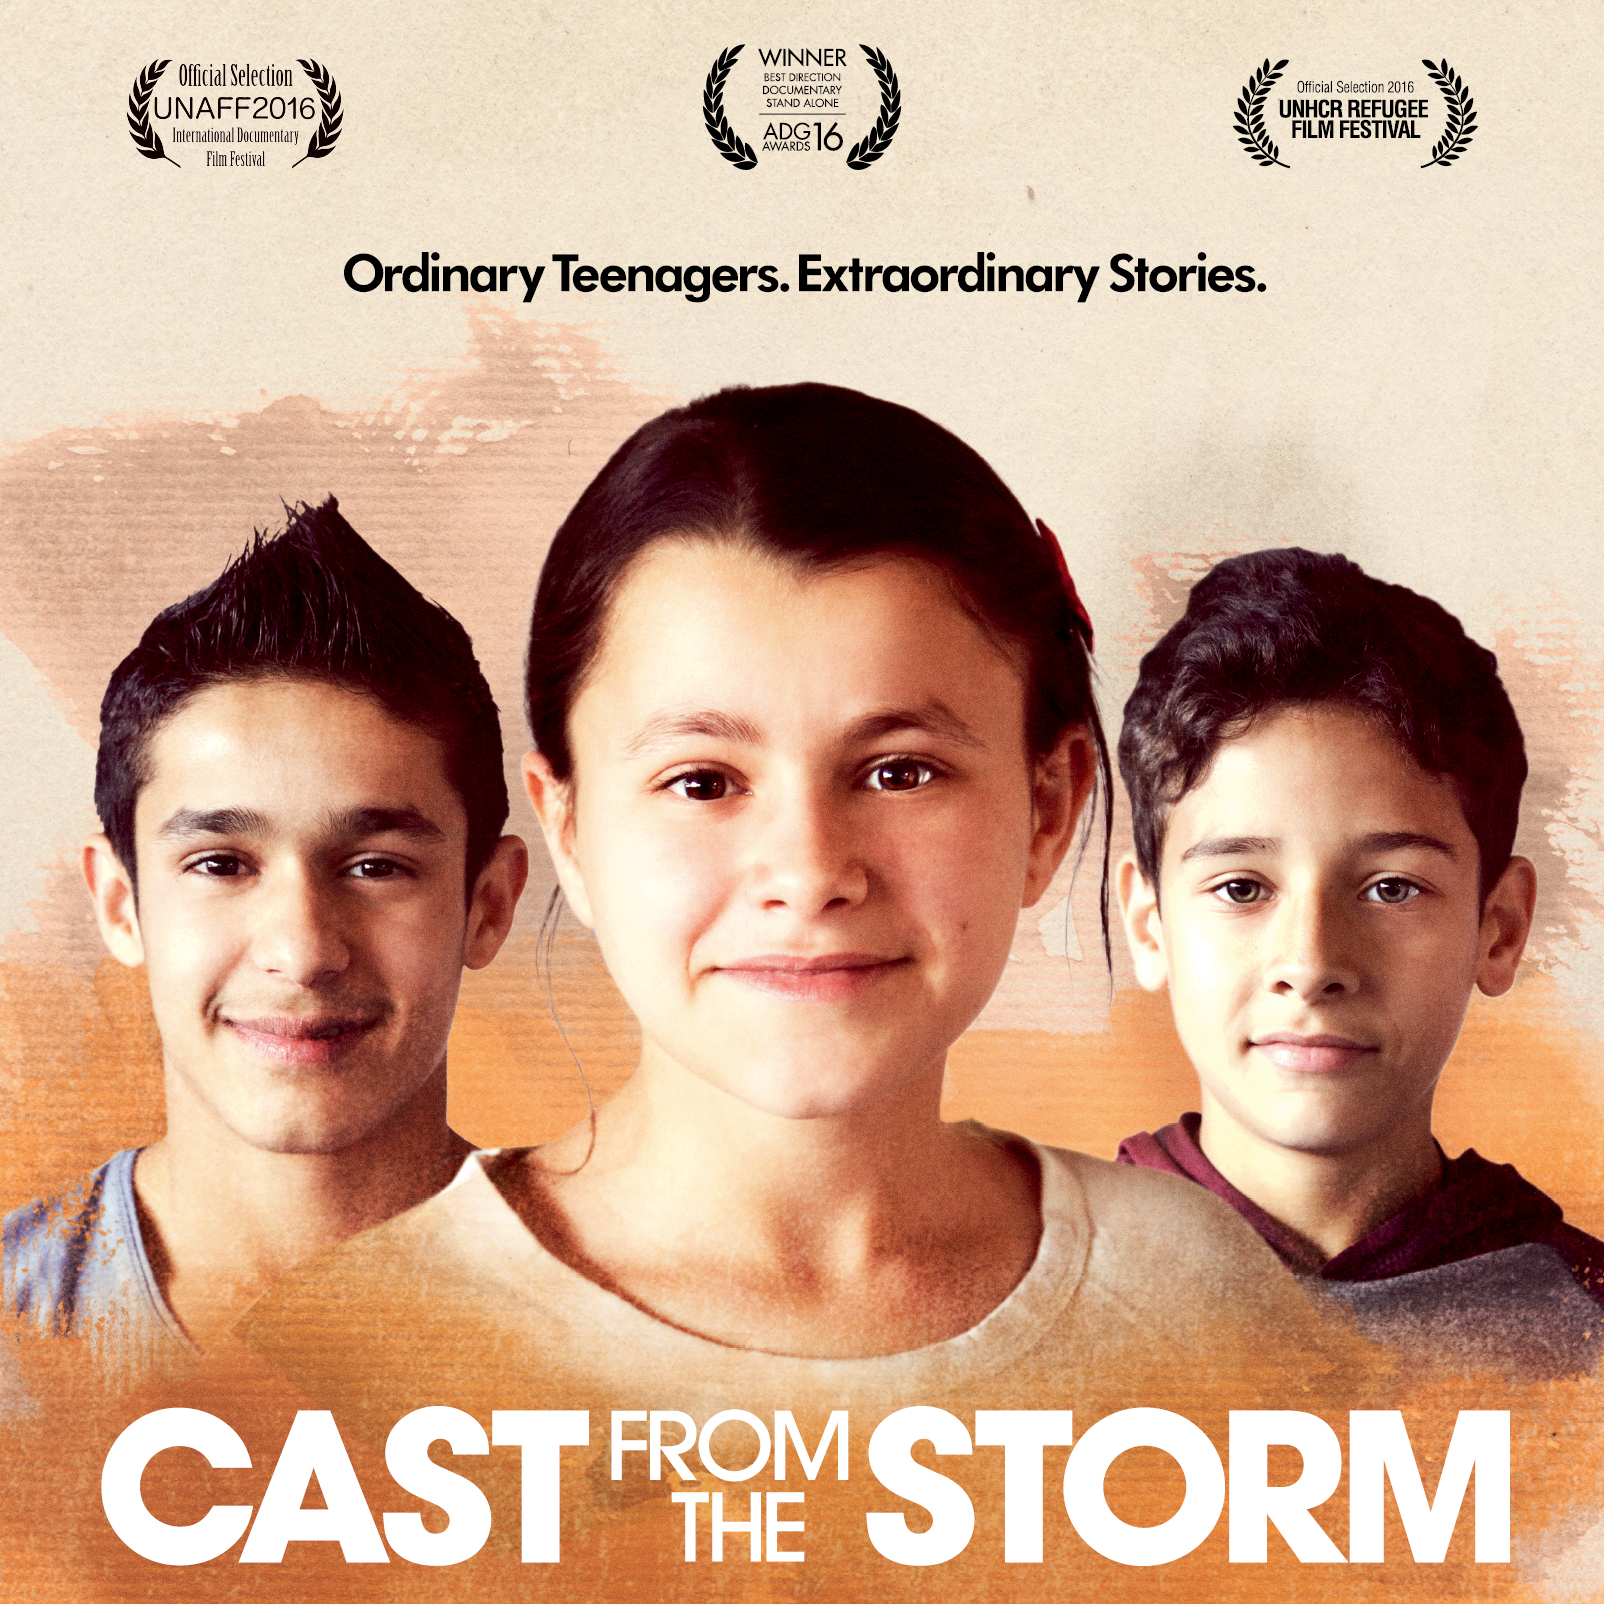 RAR Griffith presents Cast From The Storm